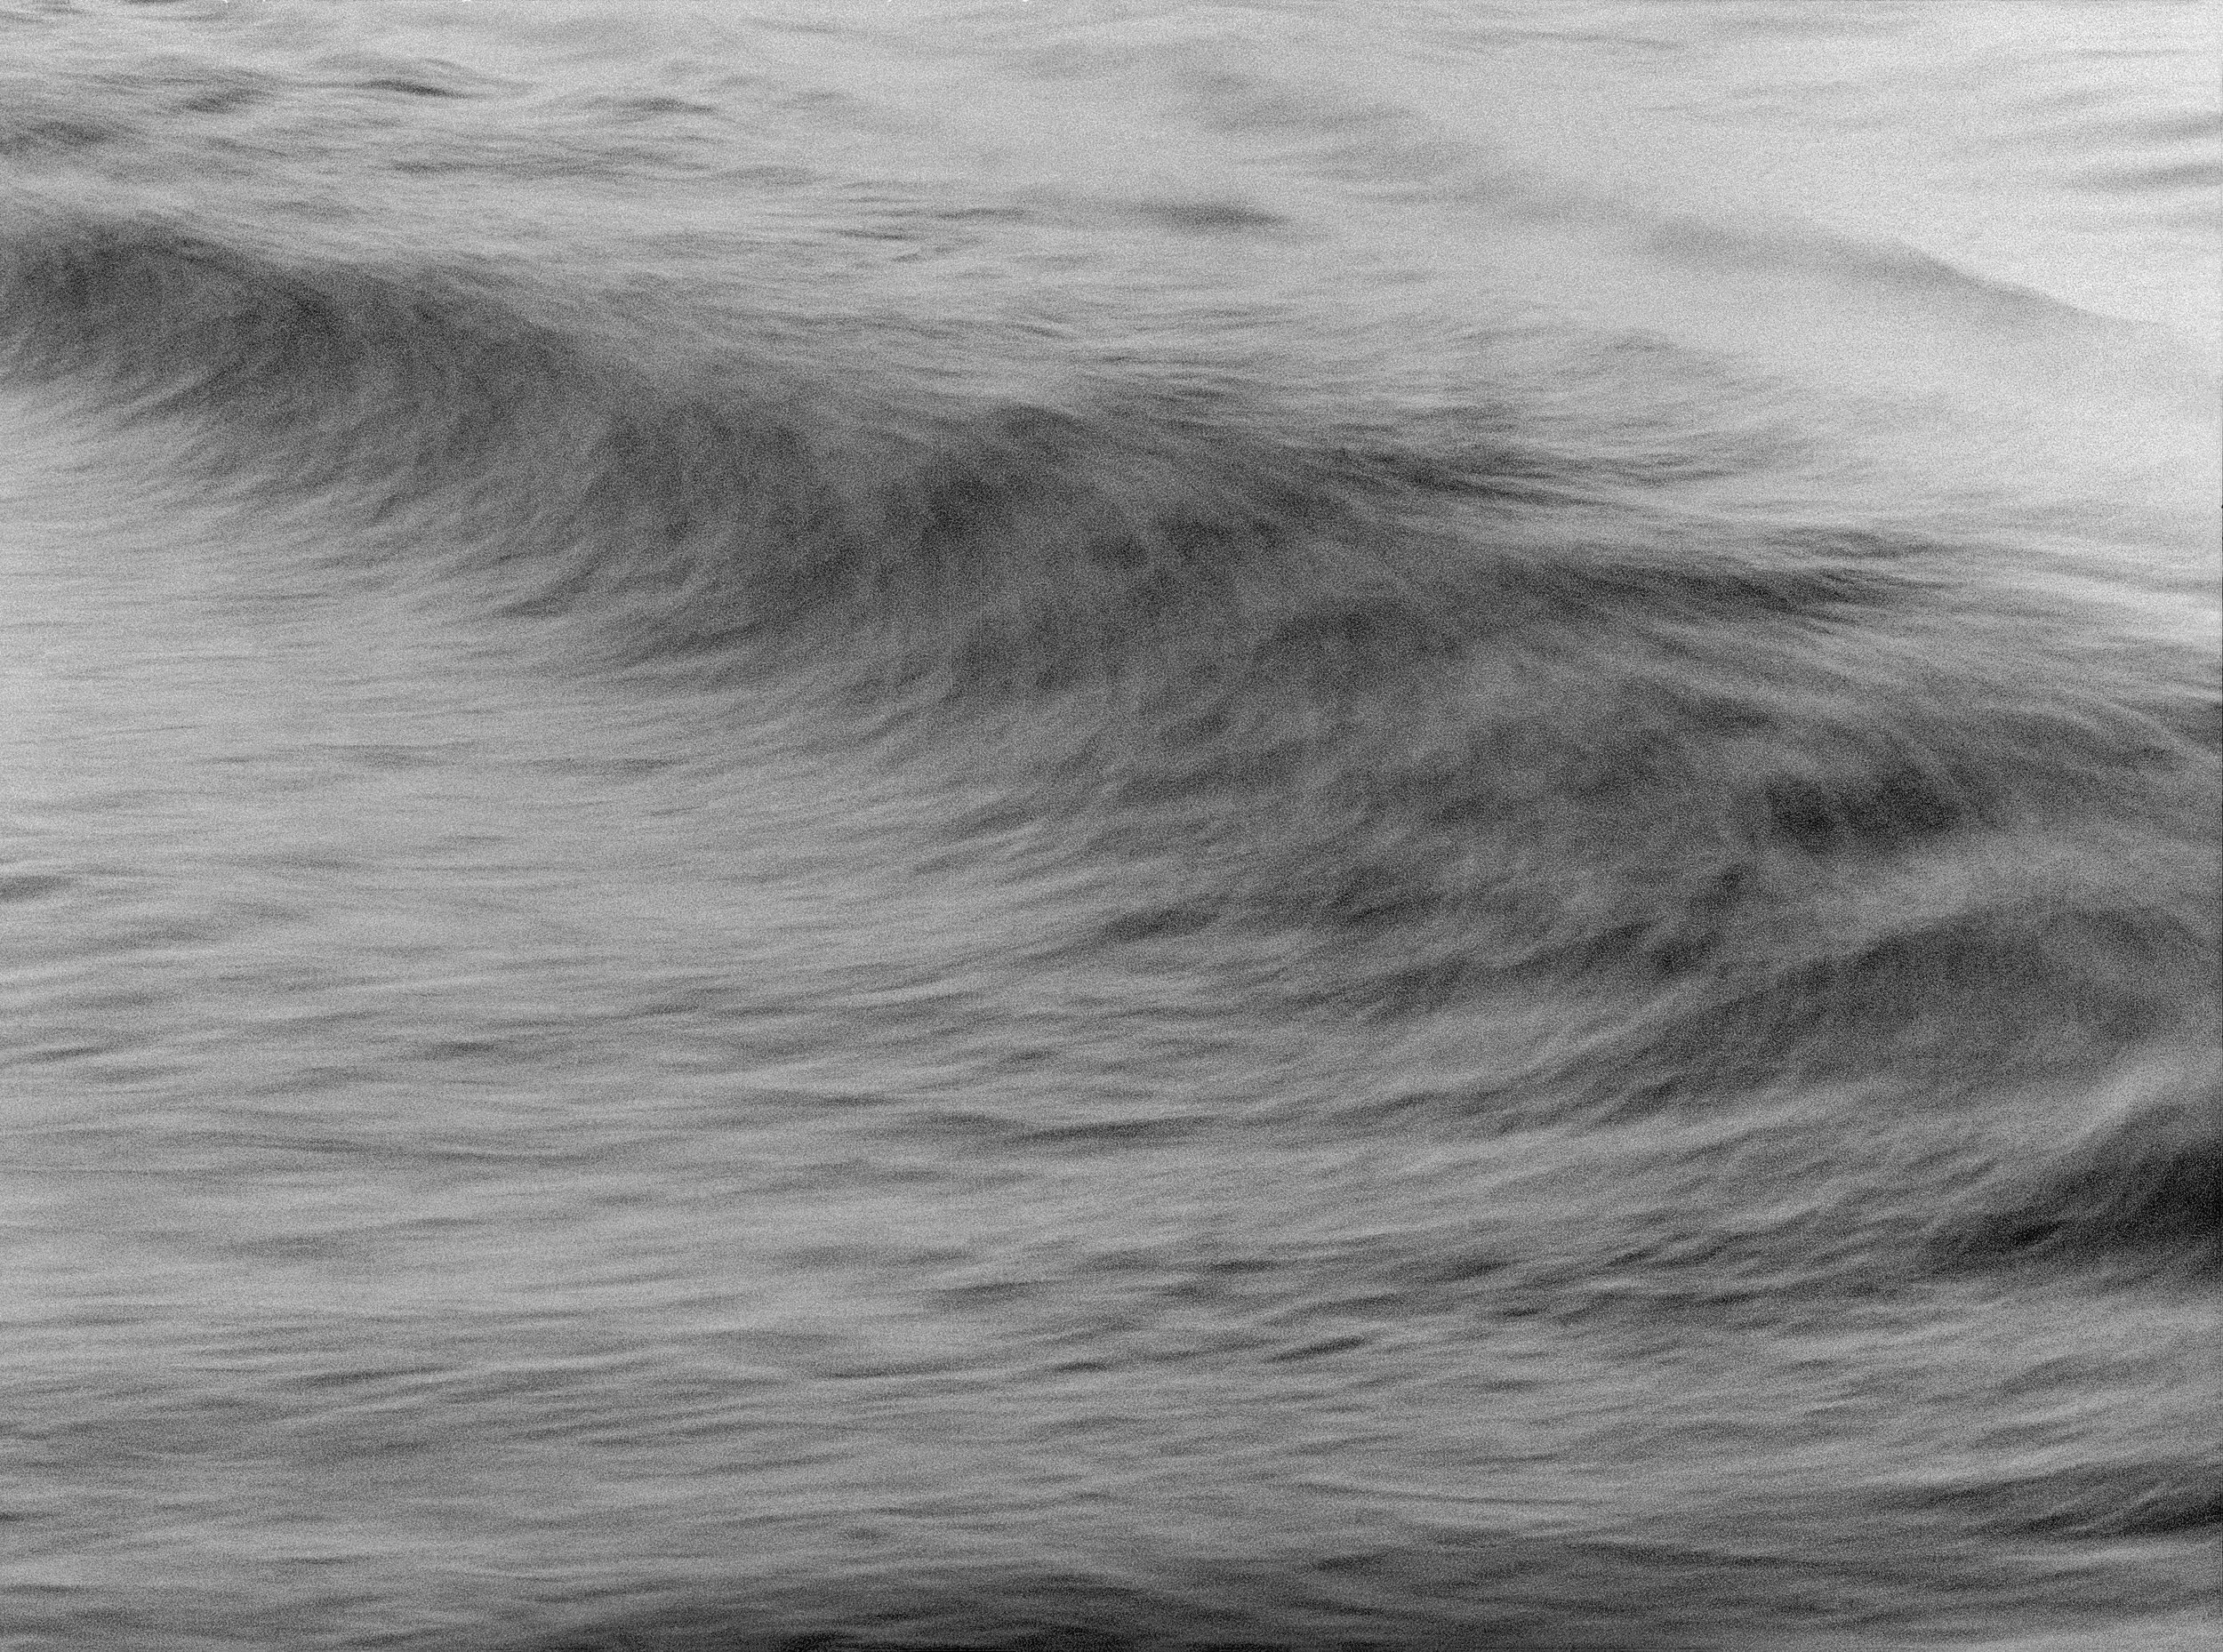 wave, somers 2002